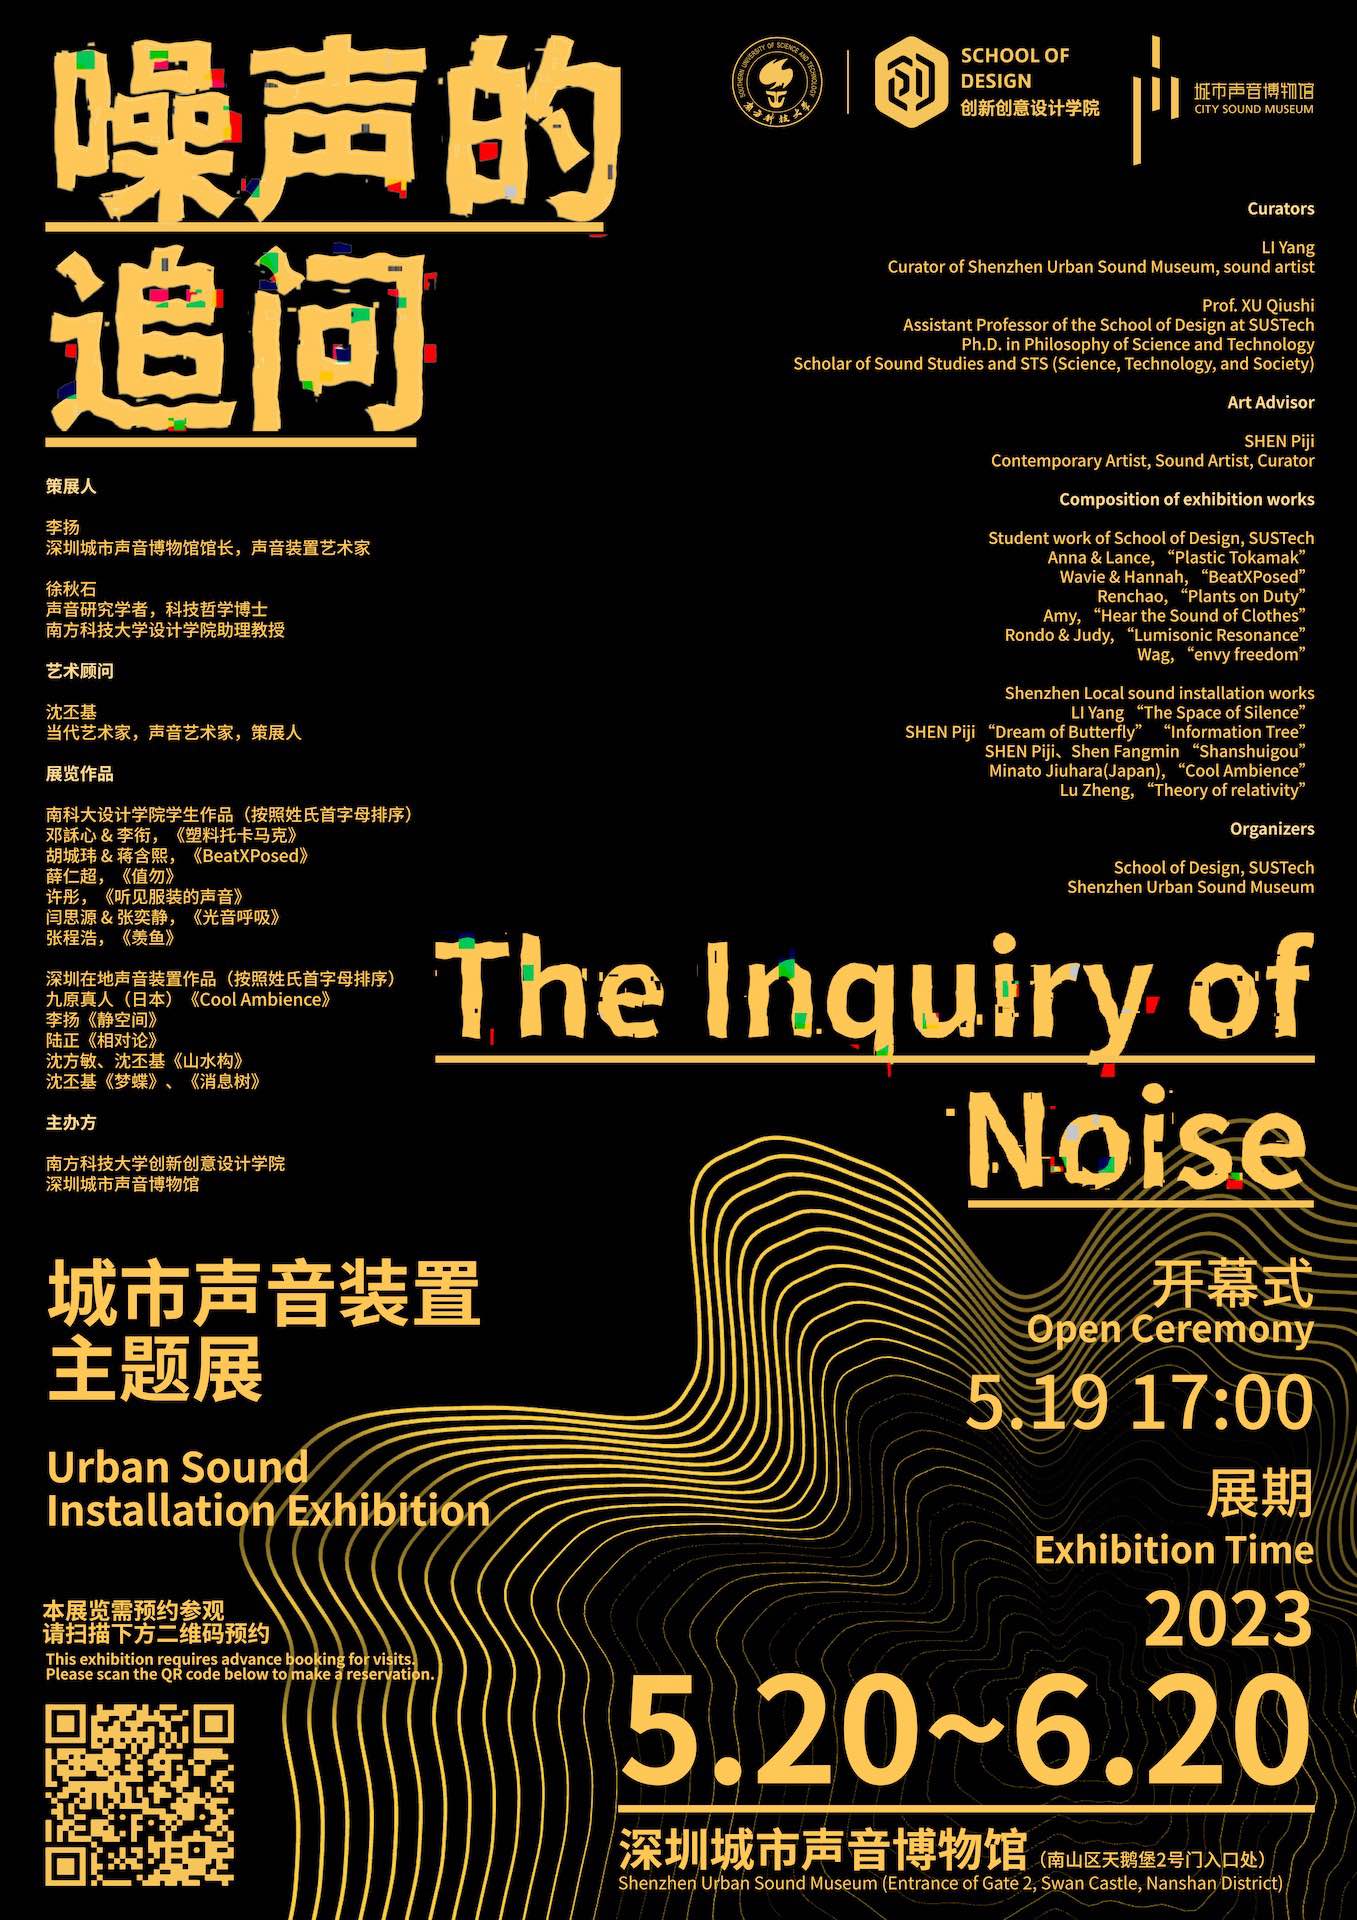 Urban Sound Installation Exhibition — The Inquiry of Noise